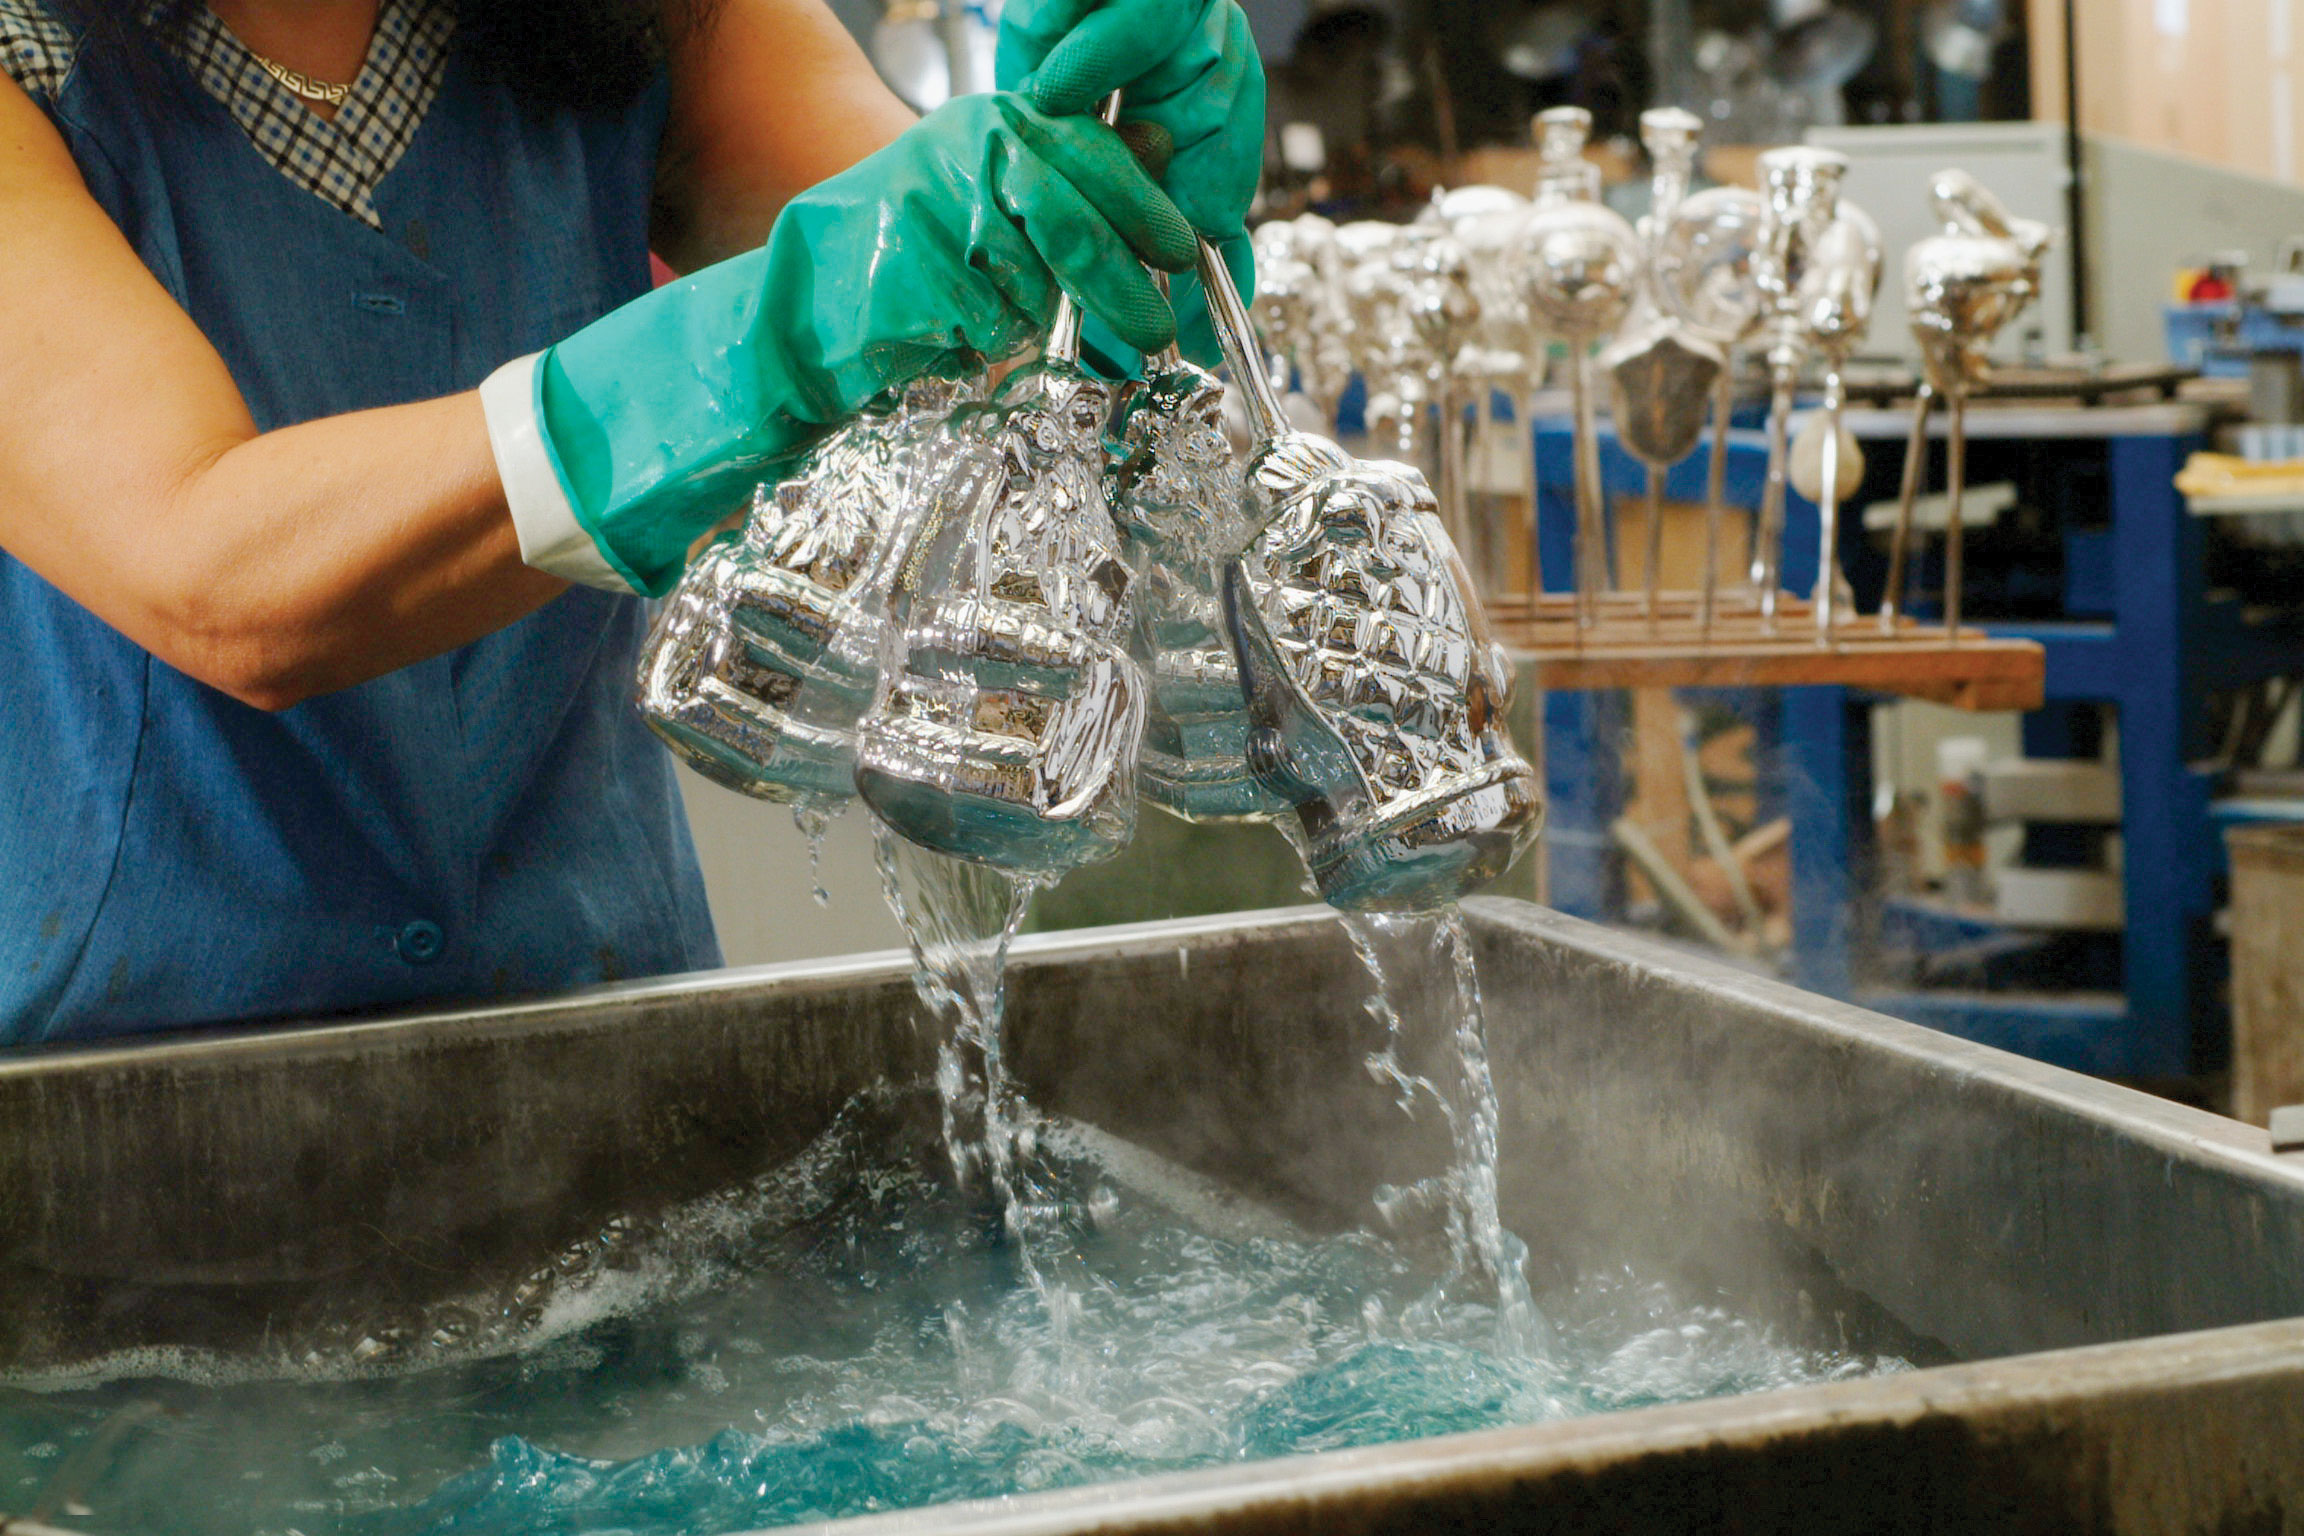 A silver sink filled with blue liquid with a person dunking glasses into the liquid.